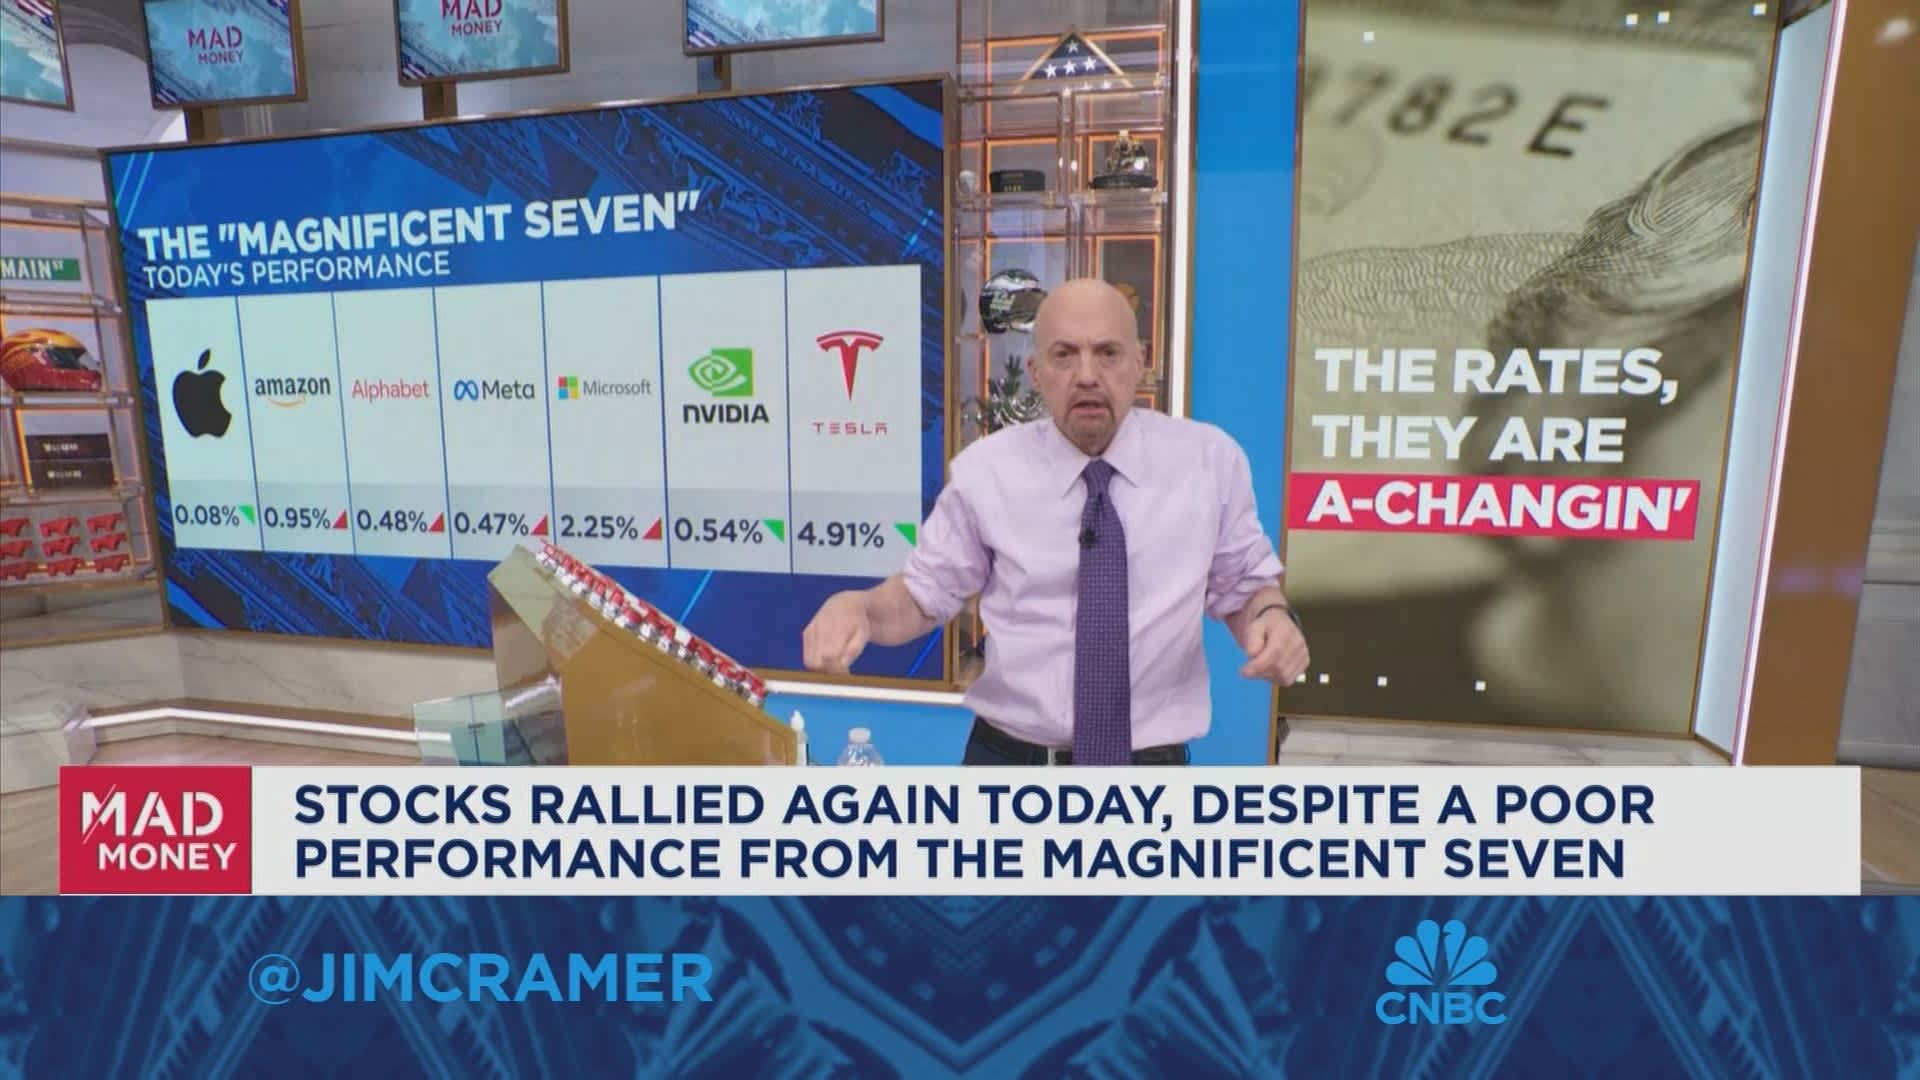 This was not a market rally led by the Magnificent 7, says Jim Cramer